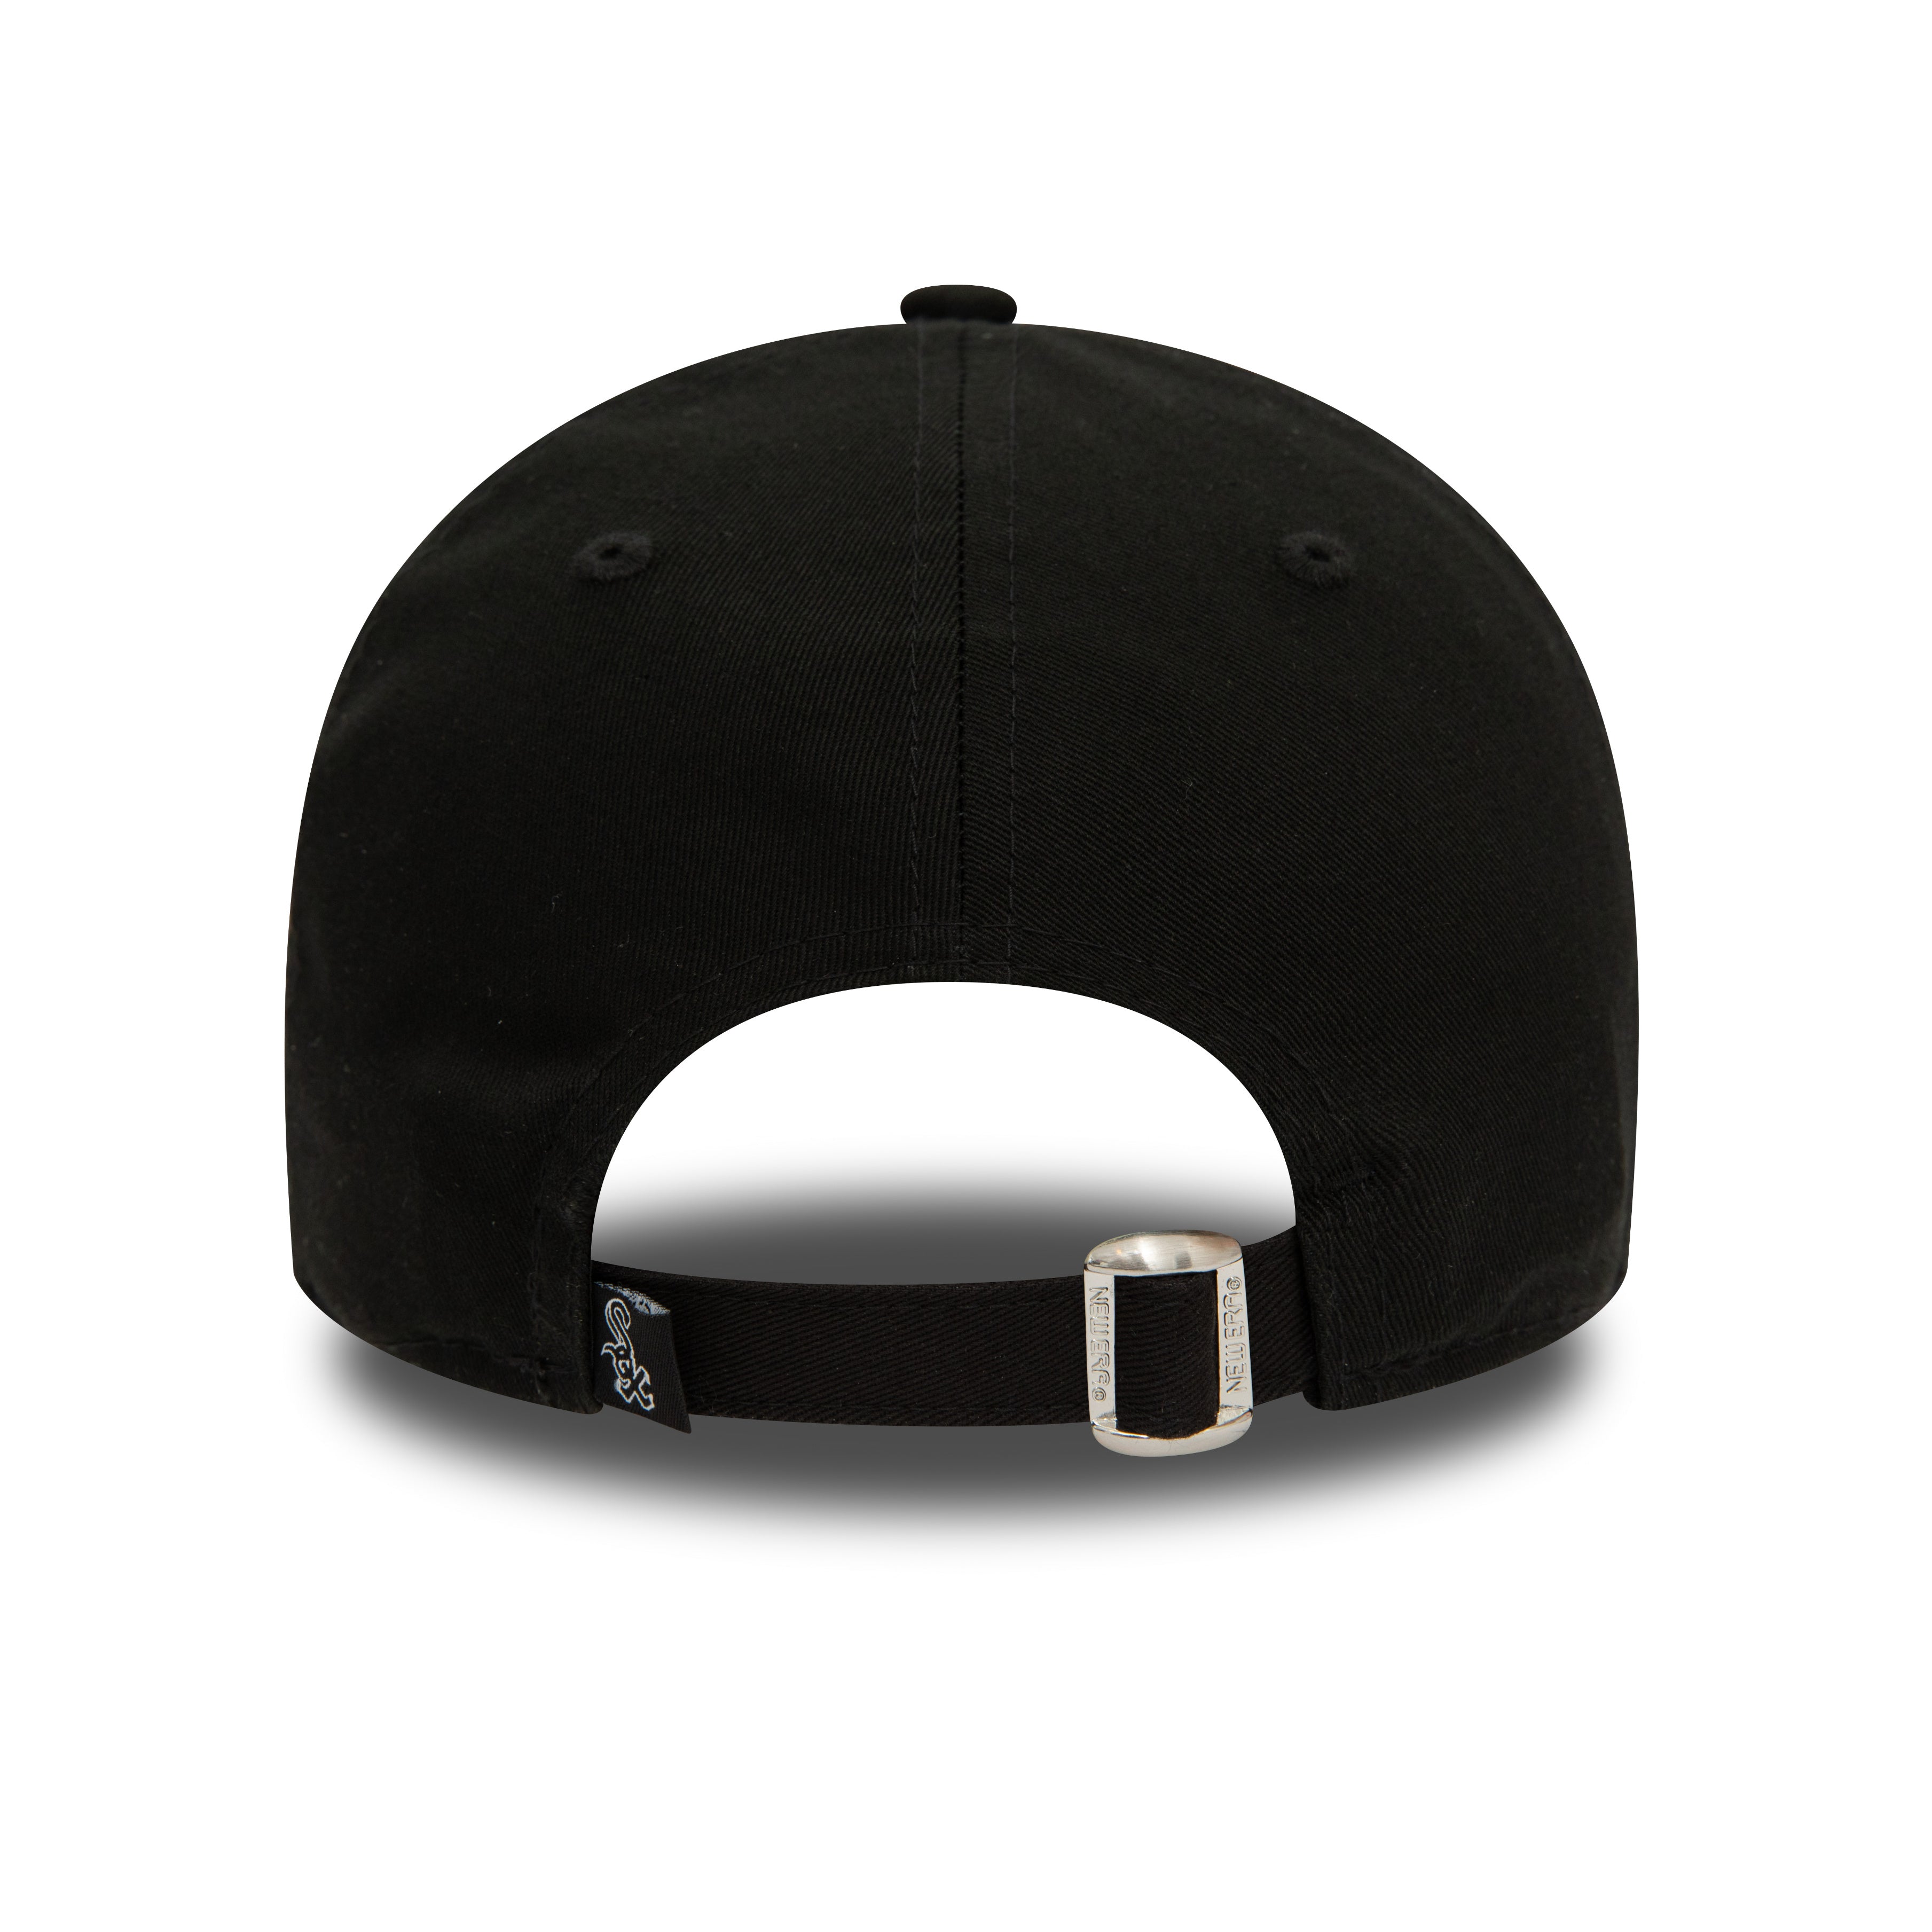 NEW ERA 9FORTY MLB CHICAGO WHITE SOX FOOD CHARACTER BLACK CAP